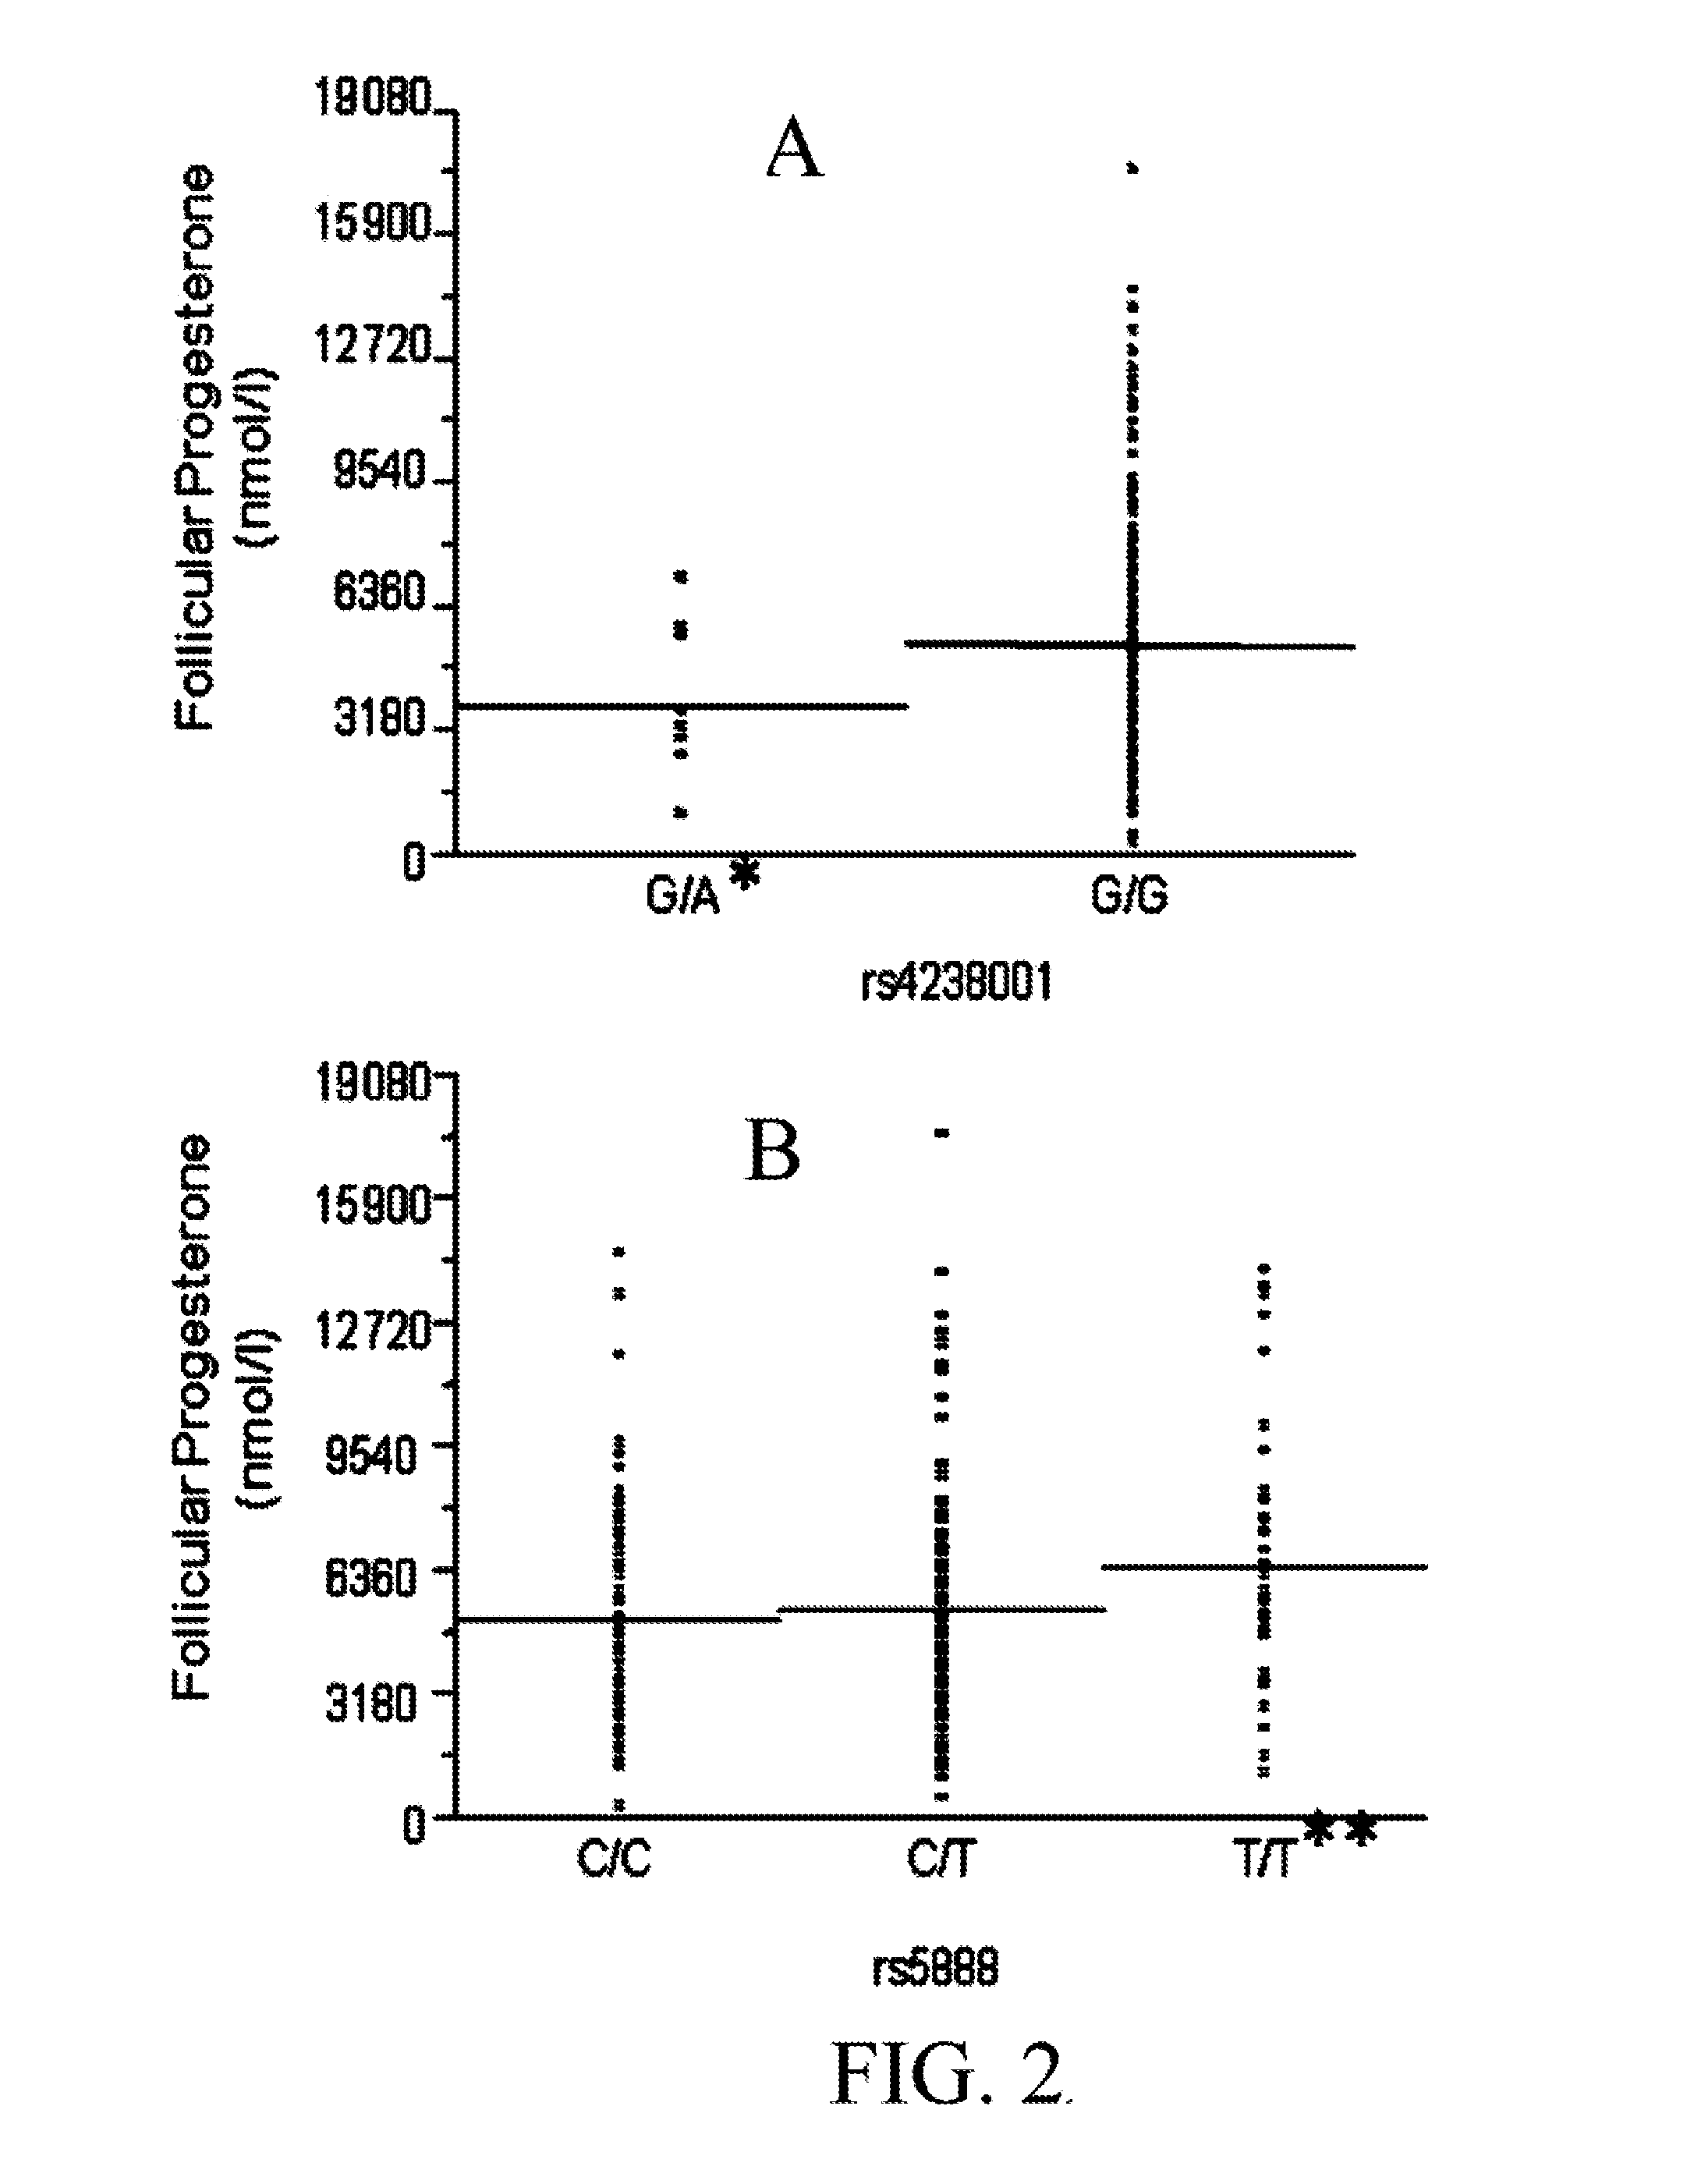 Method for pre-screening and correlation of underlying scarb1 gene variation to infertility in women and therapeutic use of progestational and other medications in treatment